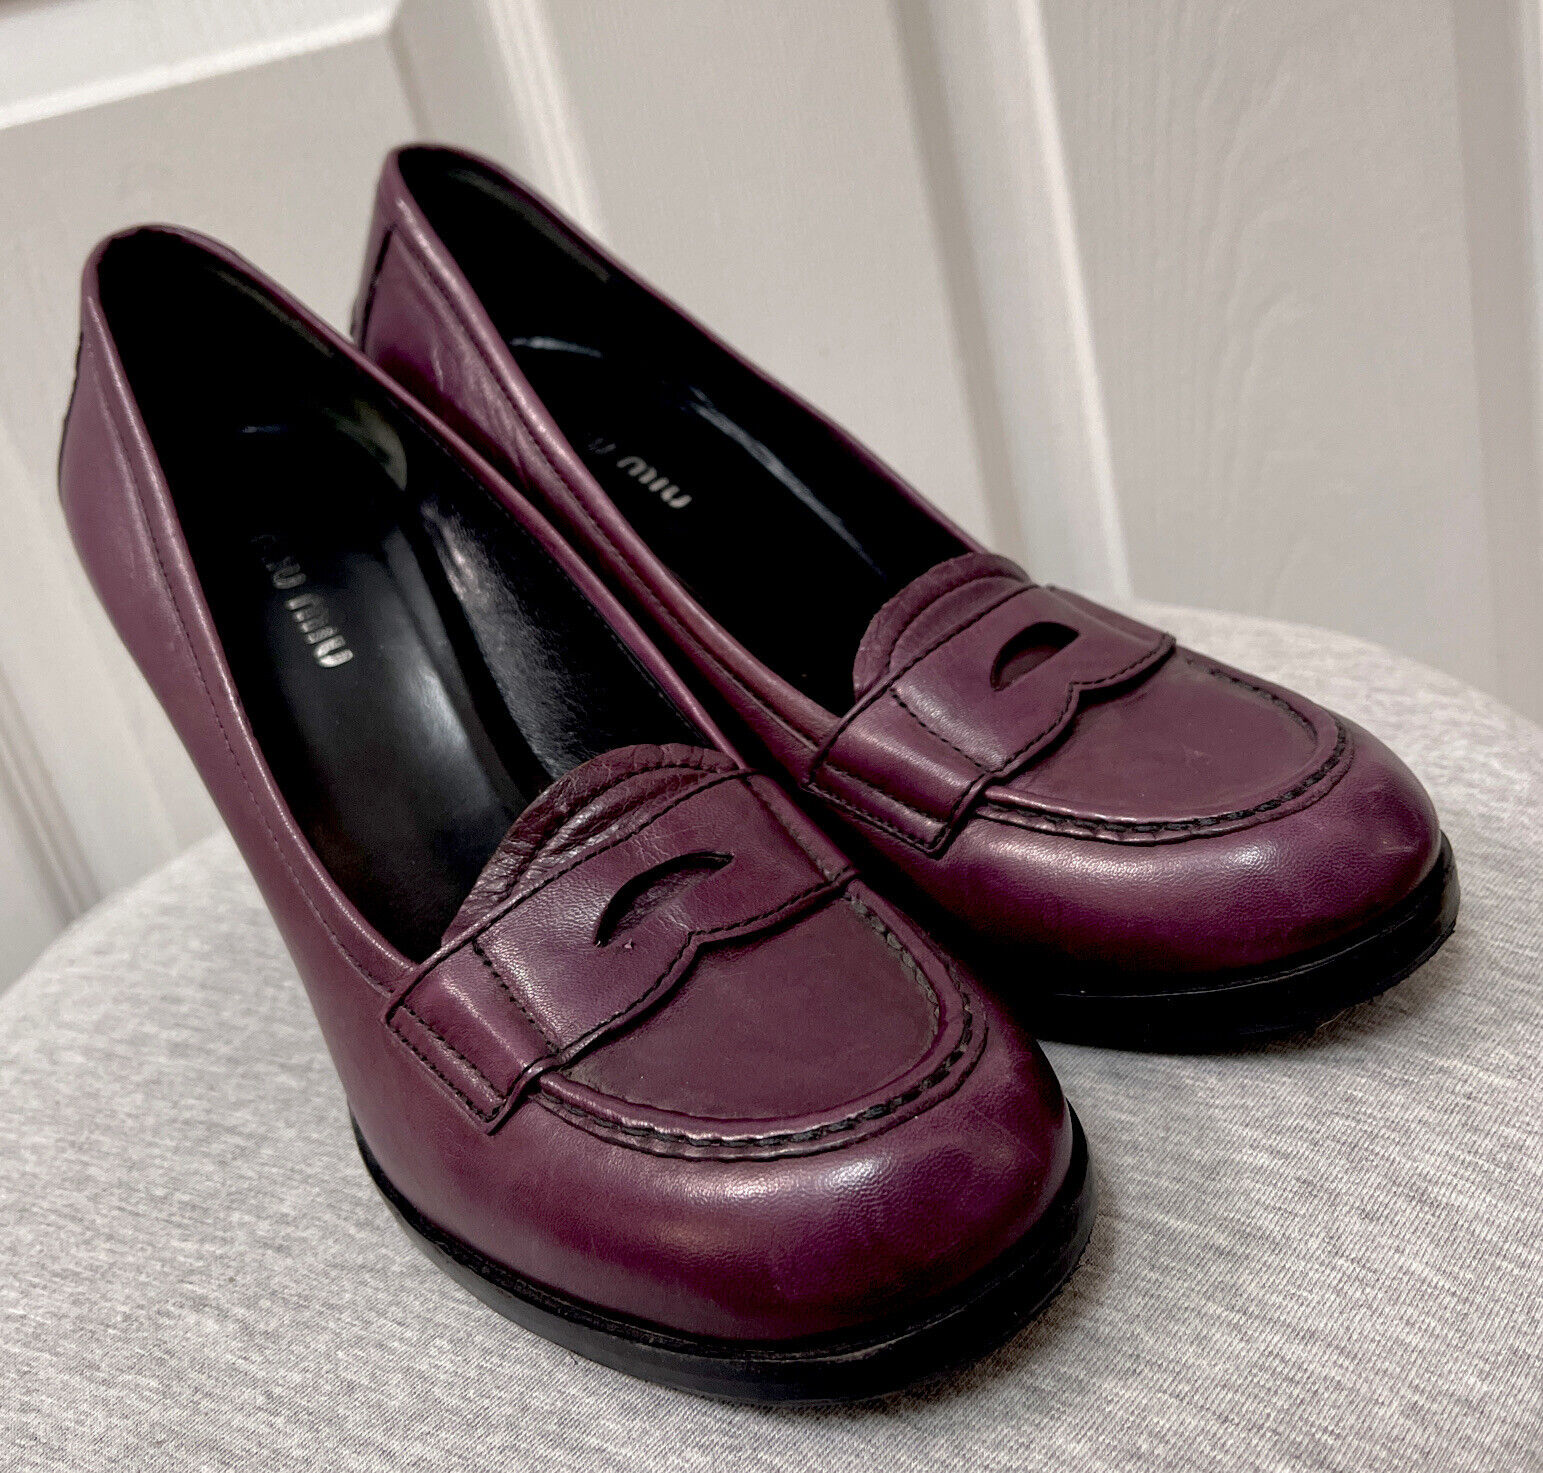 Authentic MIU MIU Loafers 🍆Genuine Leather 100%, Excellent Condition 🌟Size 39